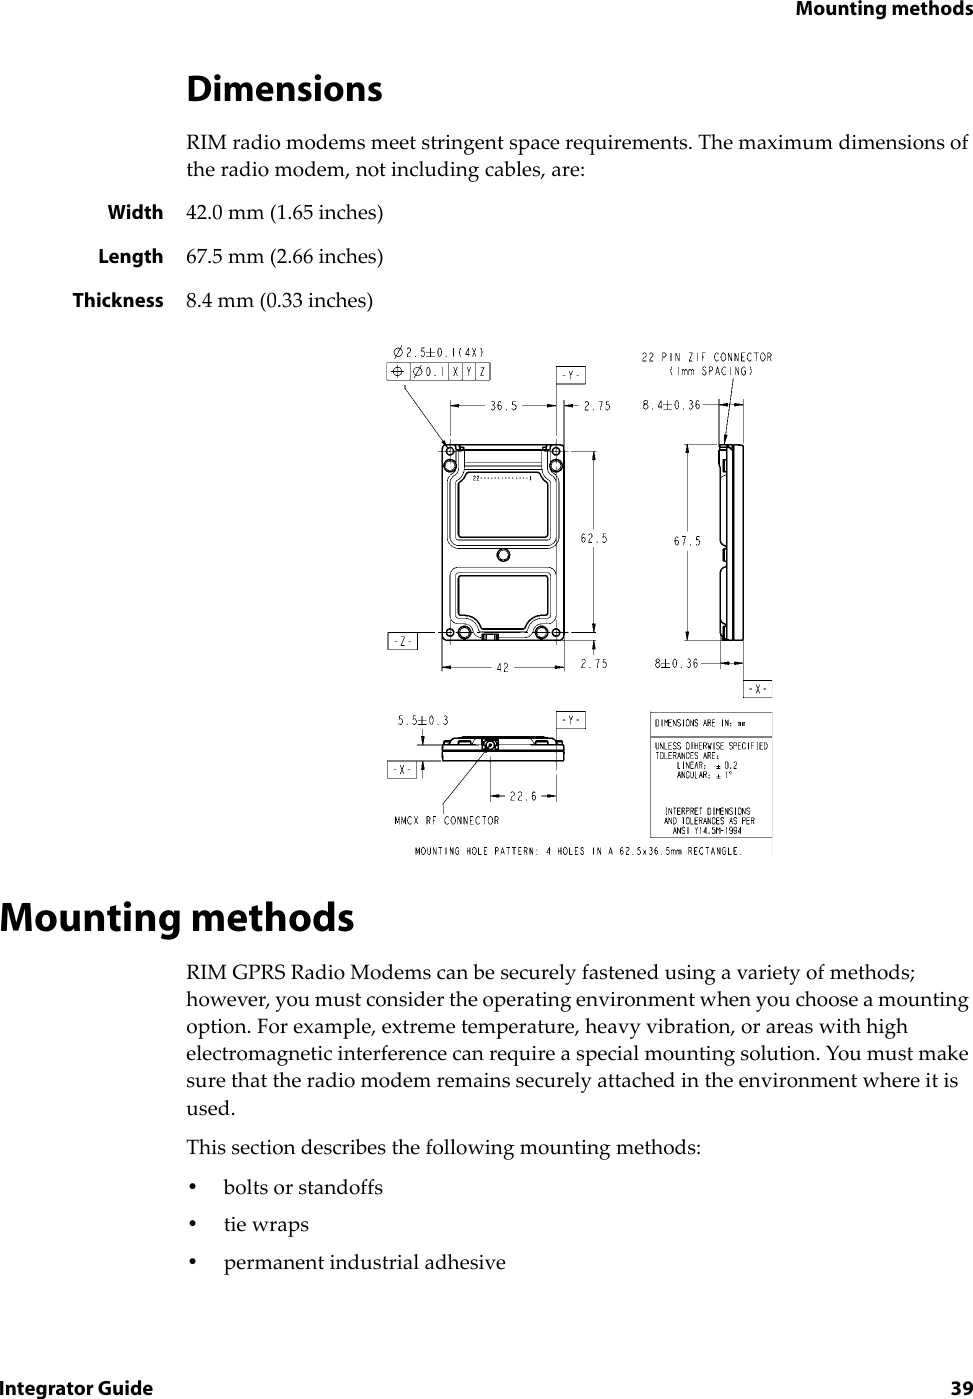 Mounting methodsIntegrator Guide 39DimensionsRIM radio modems meet stringent space requirements. The maximum dimensions of the radio modem, not including cables, are:Width 42.0 mm (1.65 inches)Length 67.5 mm (2.66 inches)Thickness 8.4 mm (0.33 inches)Mounting methodsRIM GPRS Radio Modems can be securely fastened using a variety of methods; however, you must consider the operating environment when you choose a mounting option. For example, extreme temperature, heavy vibration, or areas with high electromagnetic interference can require a special mounting solution. You must make sure that the radio modem remains securely attached in the environment where it is used.This section describes the following mounting methods:•bolts or standoffs•tie wraps•permanent industrial adhesive